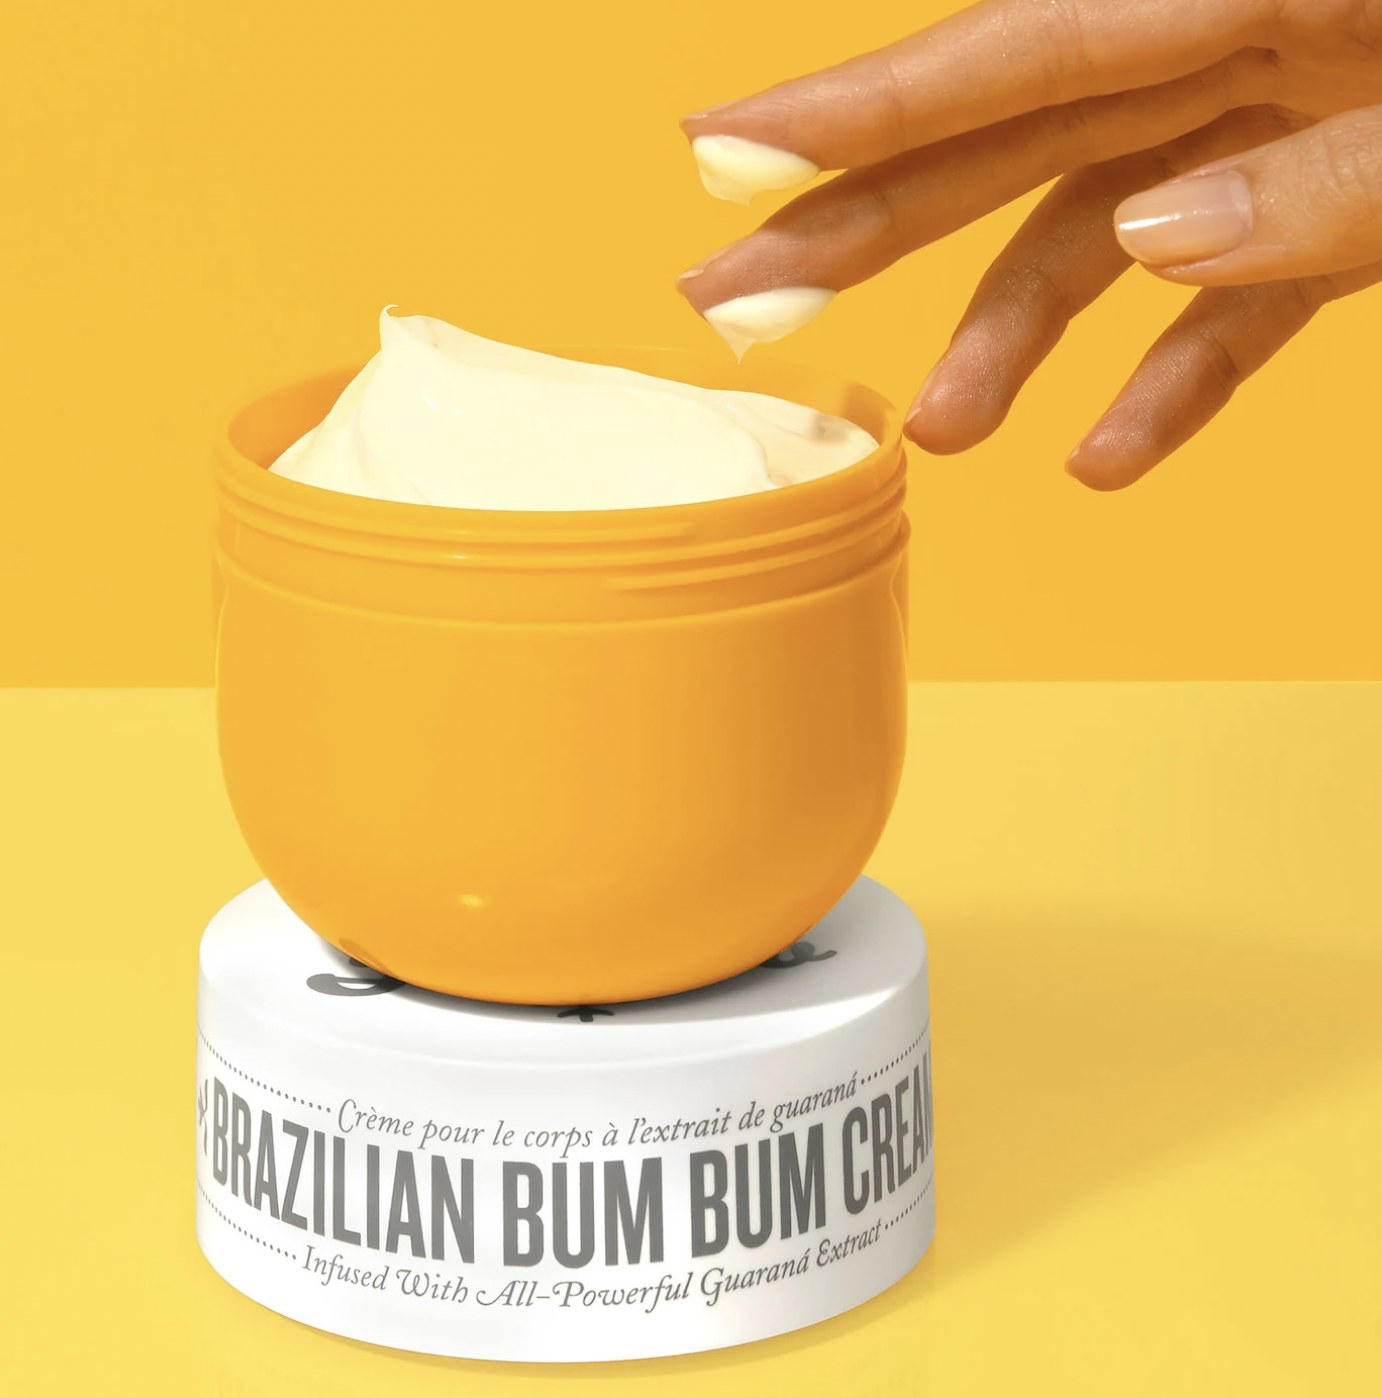 the bum bum cream jar open with someone scooping some out onto their fingertips